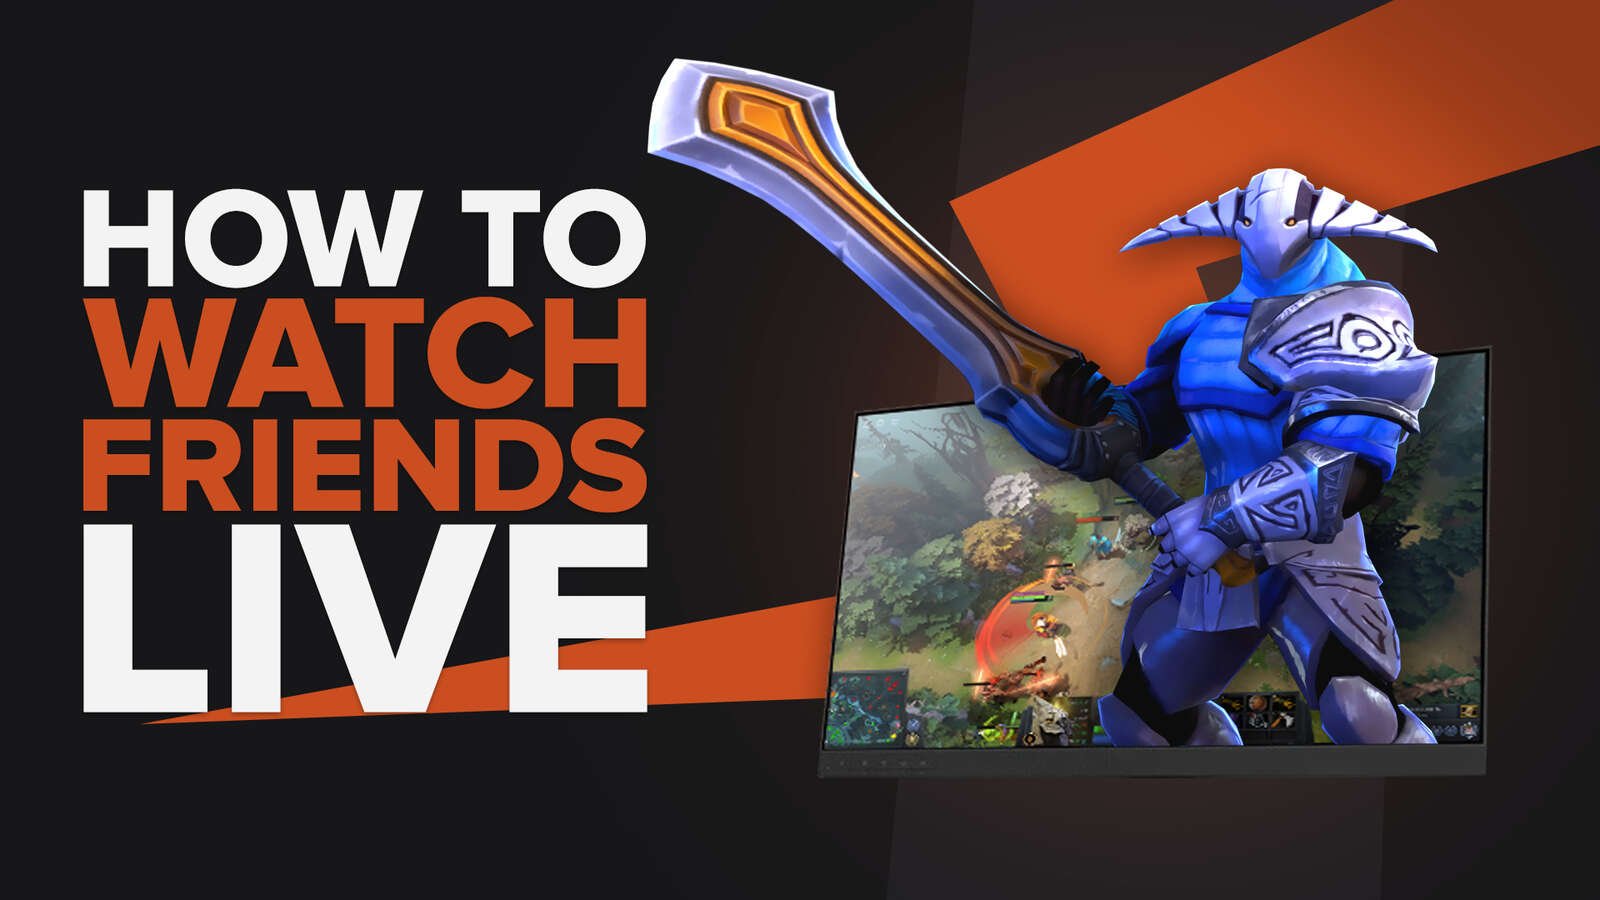 How to Watch Friends Live Game in Dota 2 (Step-By-Step Explanation)